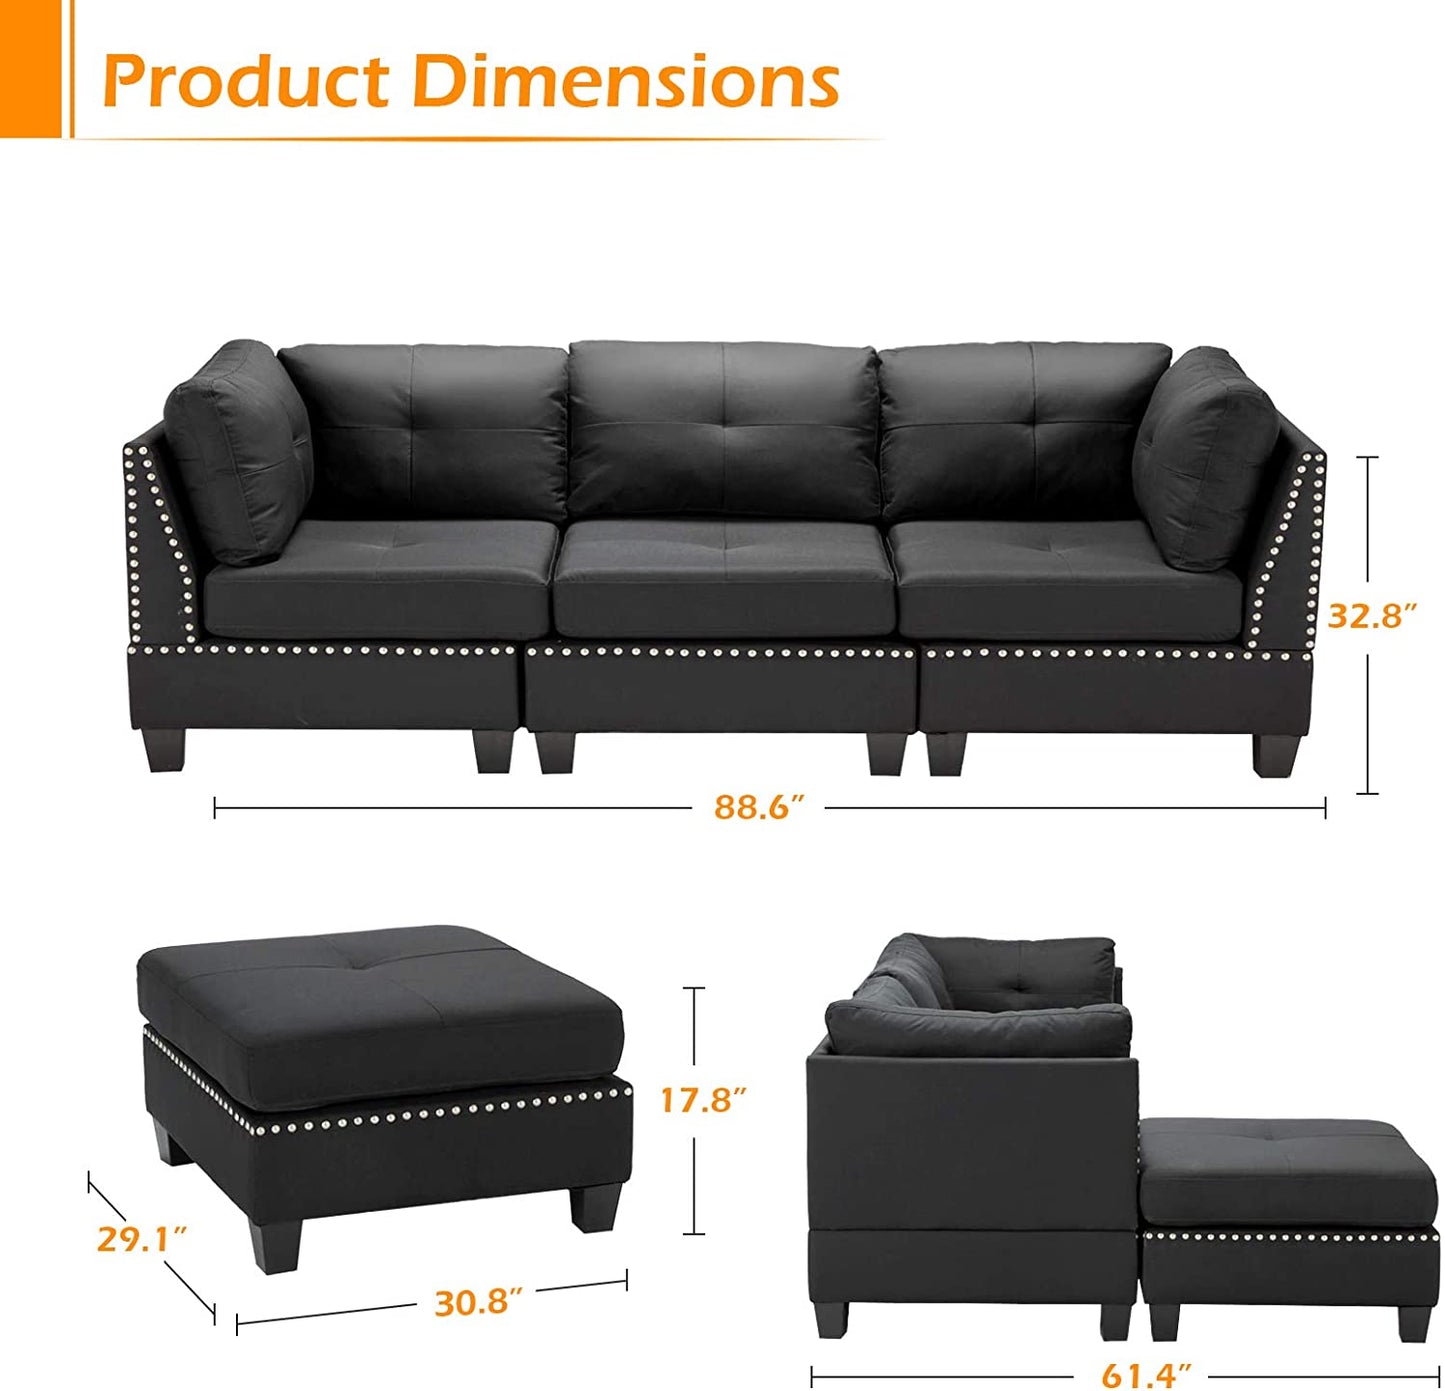 L Shape Sofa Set: L-Shaped Couch with Reversible Chaise